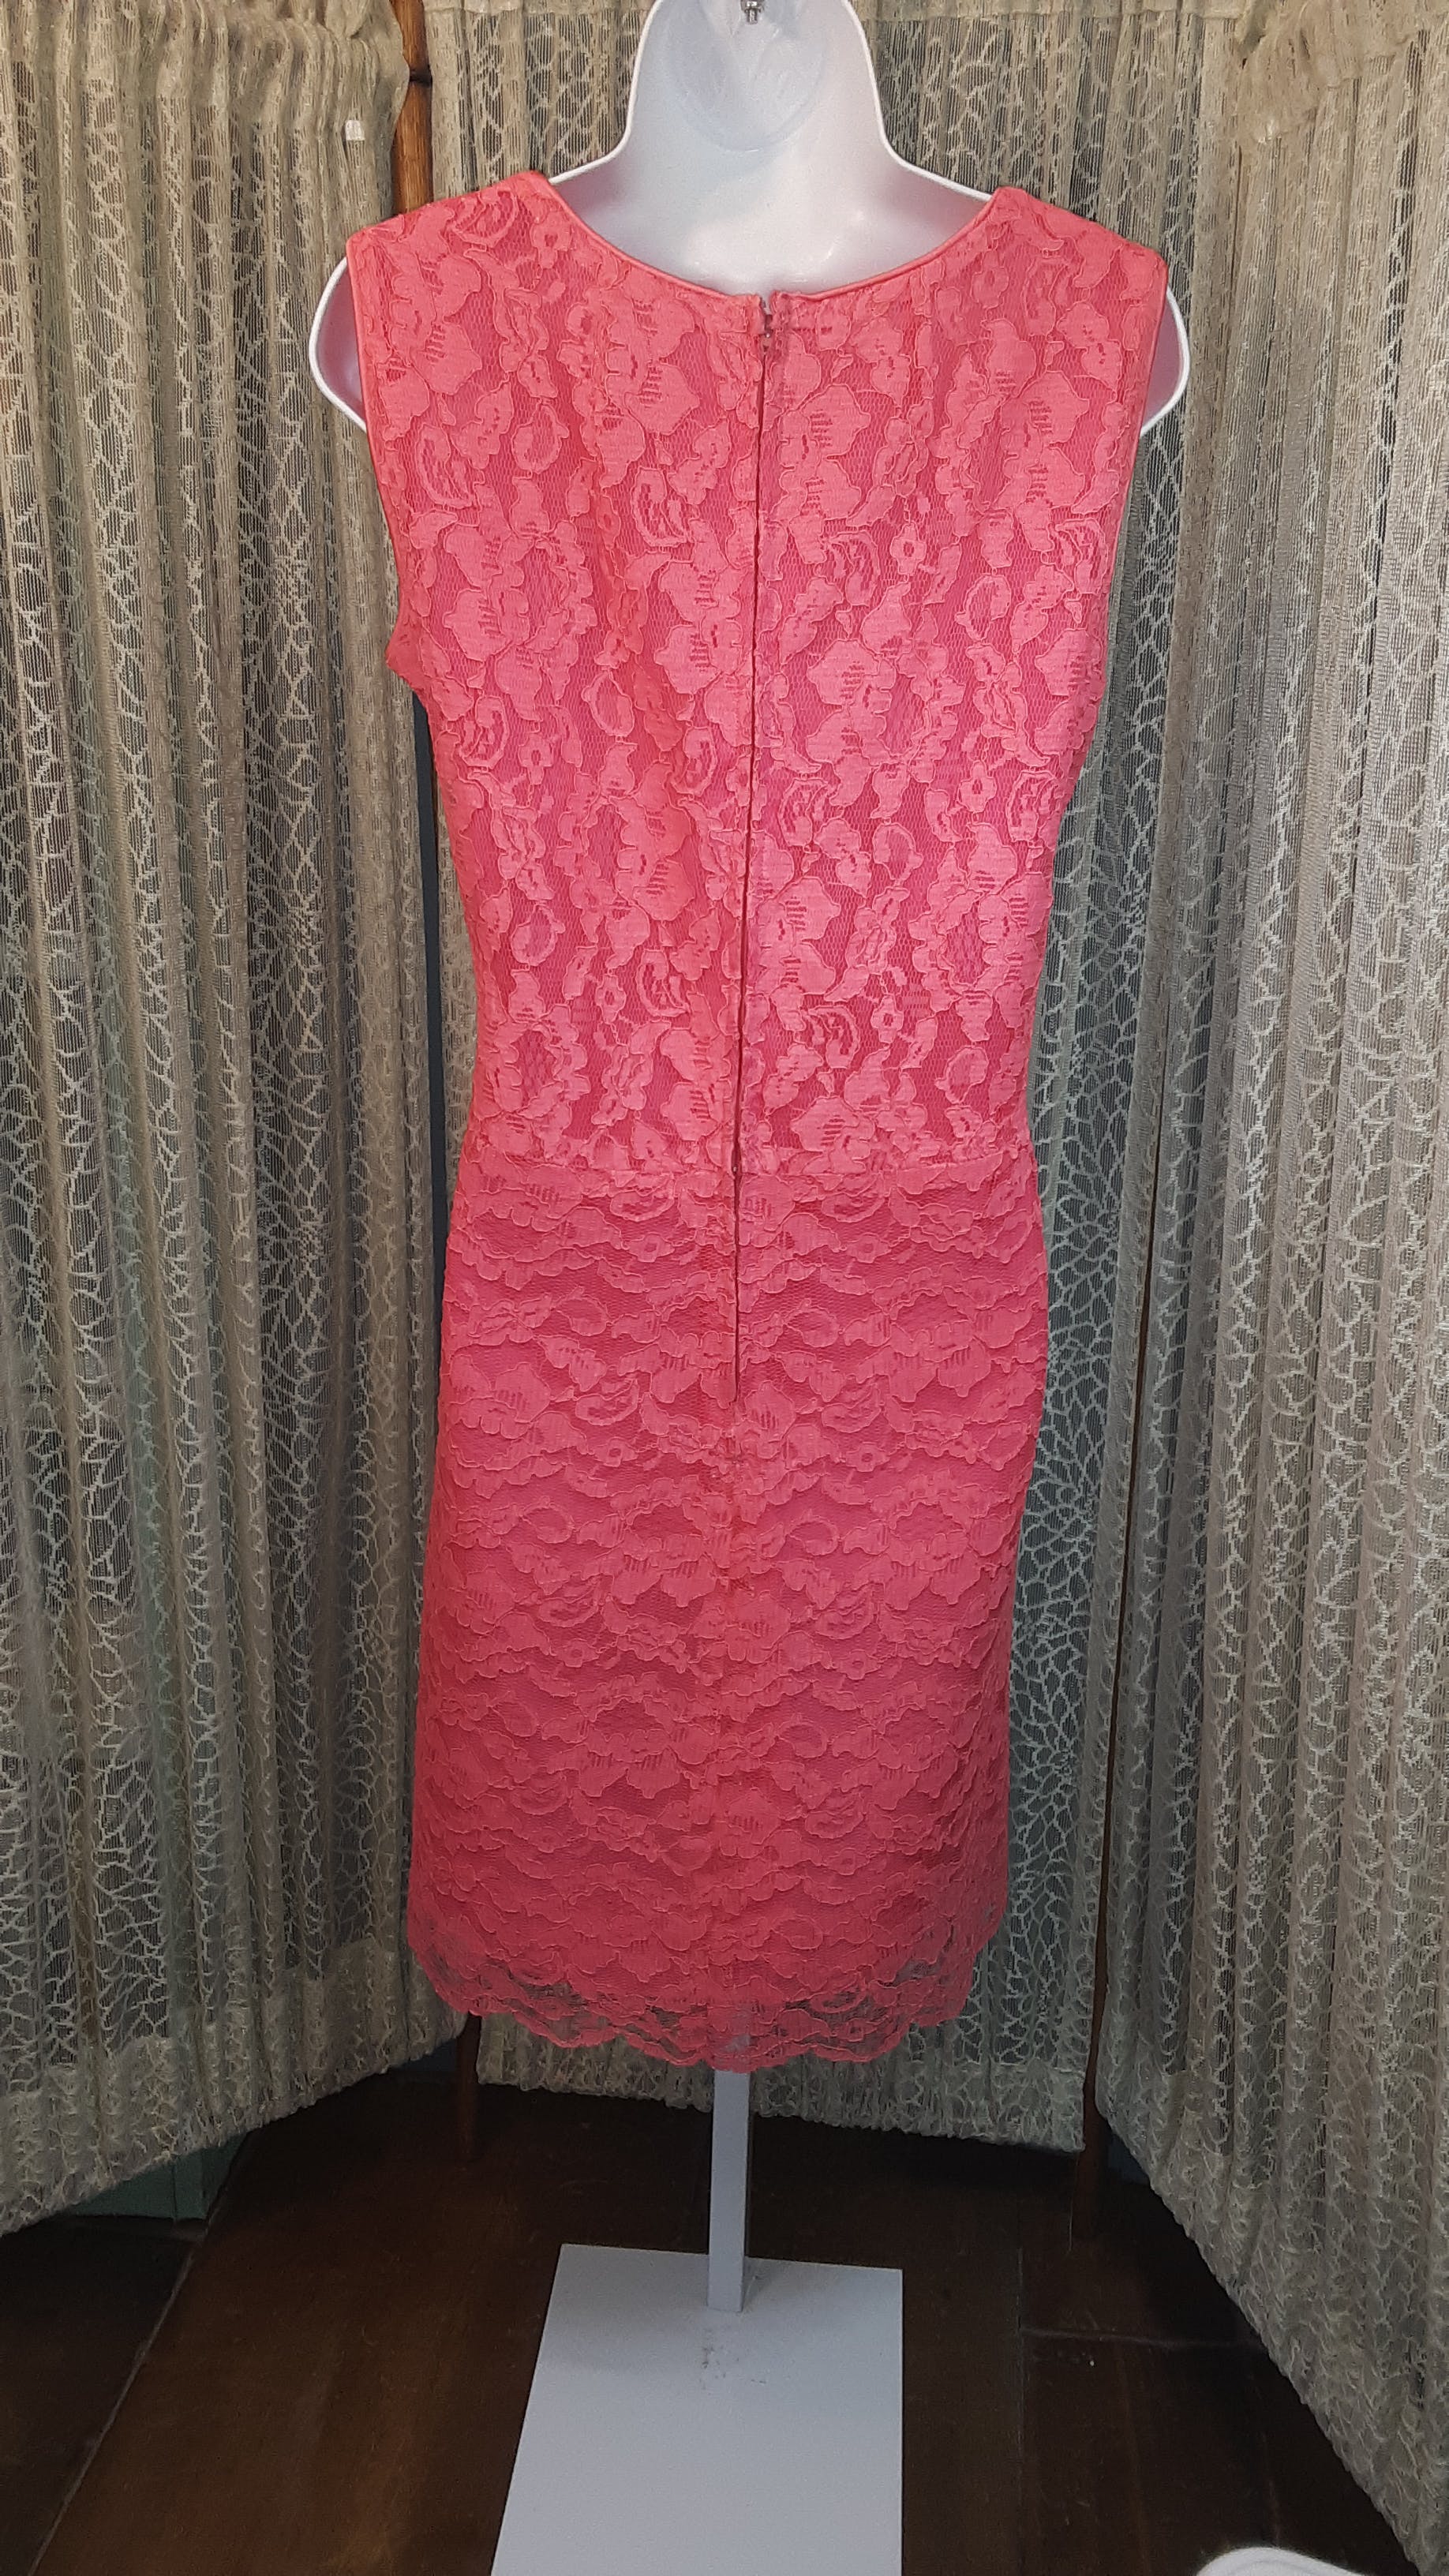 Vintage 60's 2pc Pink Lace Sheath Dress with Lace Overcoat | Shop THRILLING